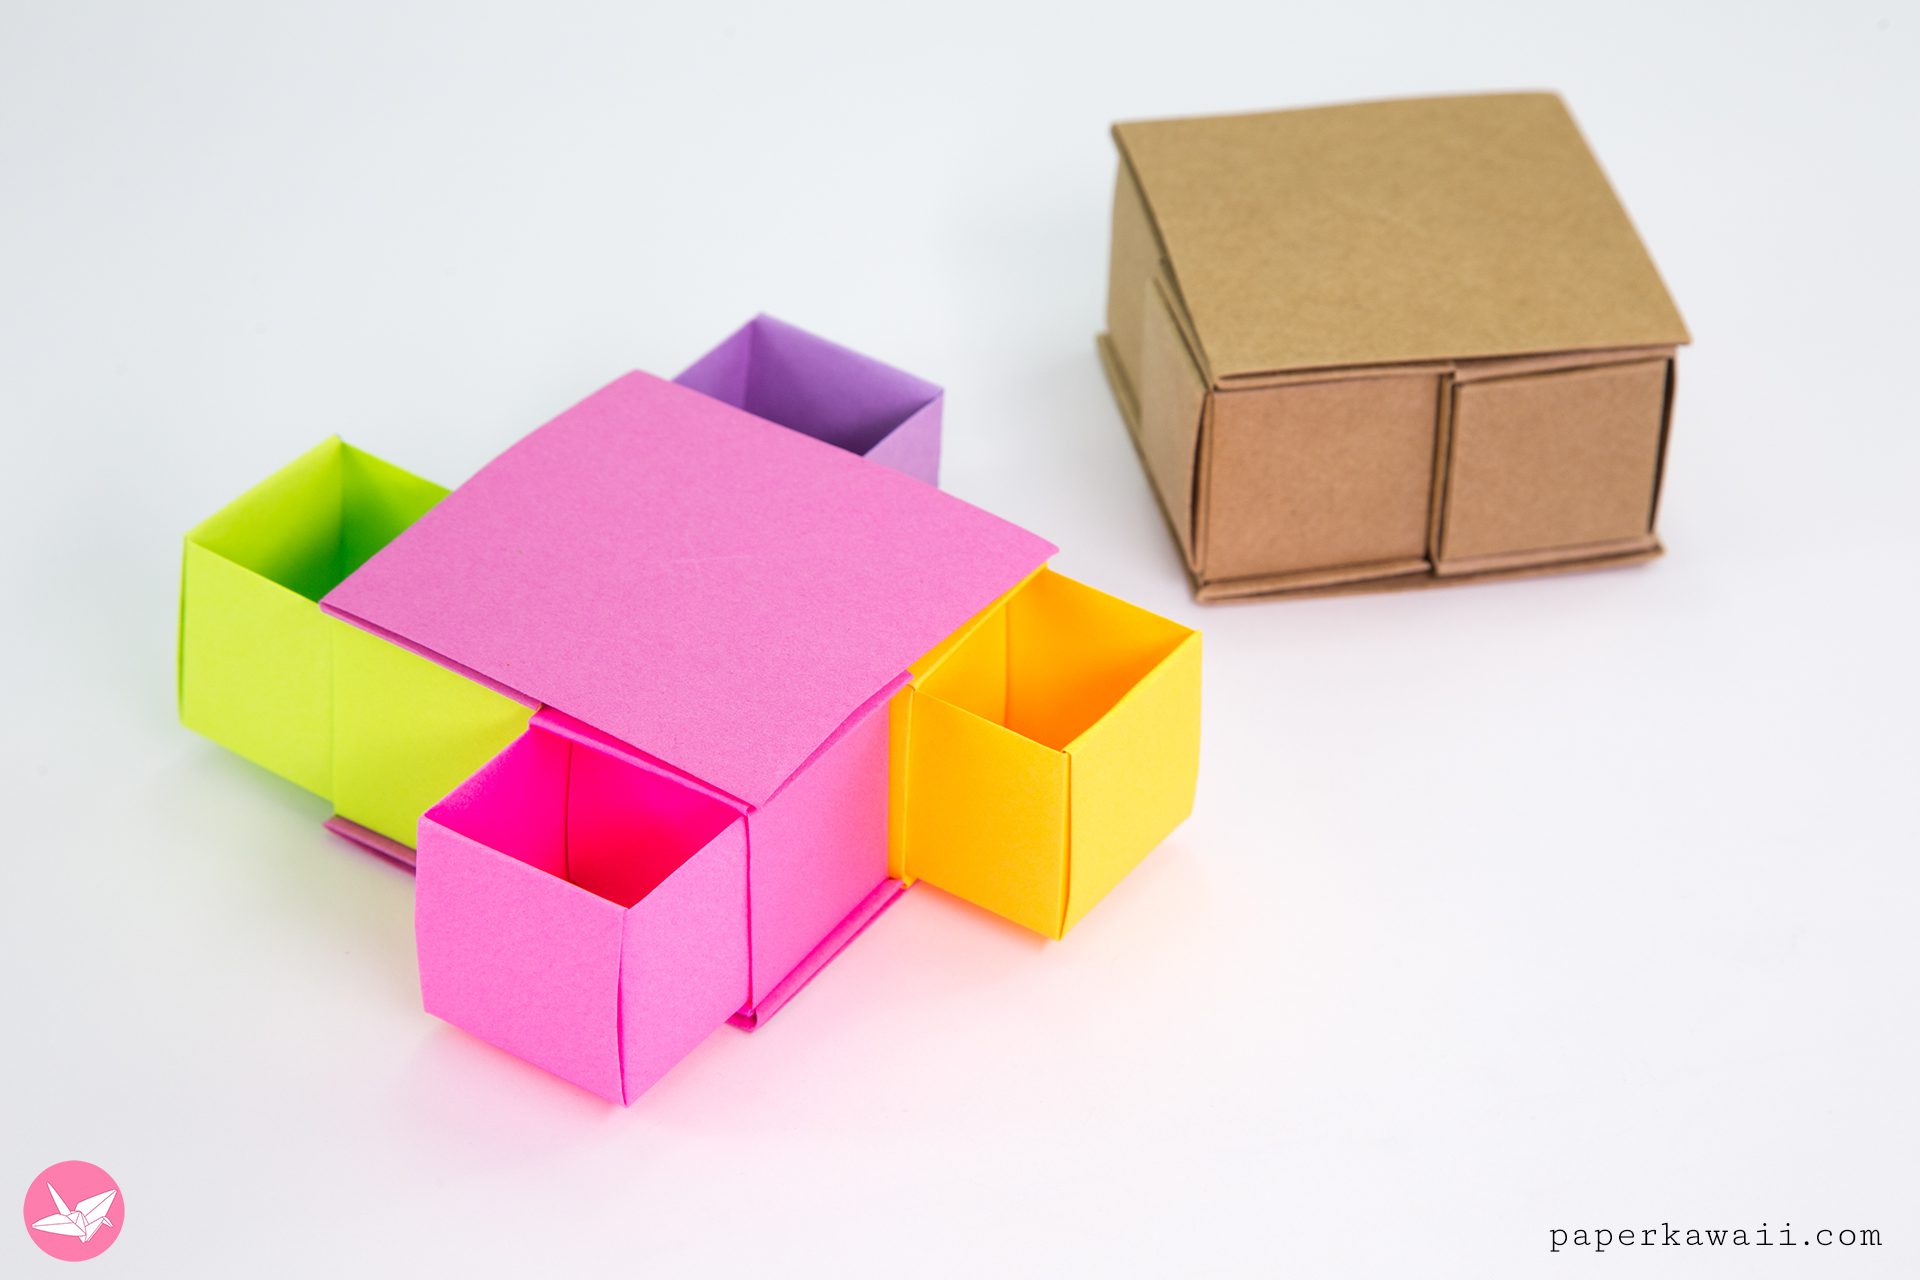 Learn how to make an origami secret drawer box using no cutting or glue, just paper. This origami drawer box has 4 inner boxes and is easy and fun to make!